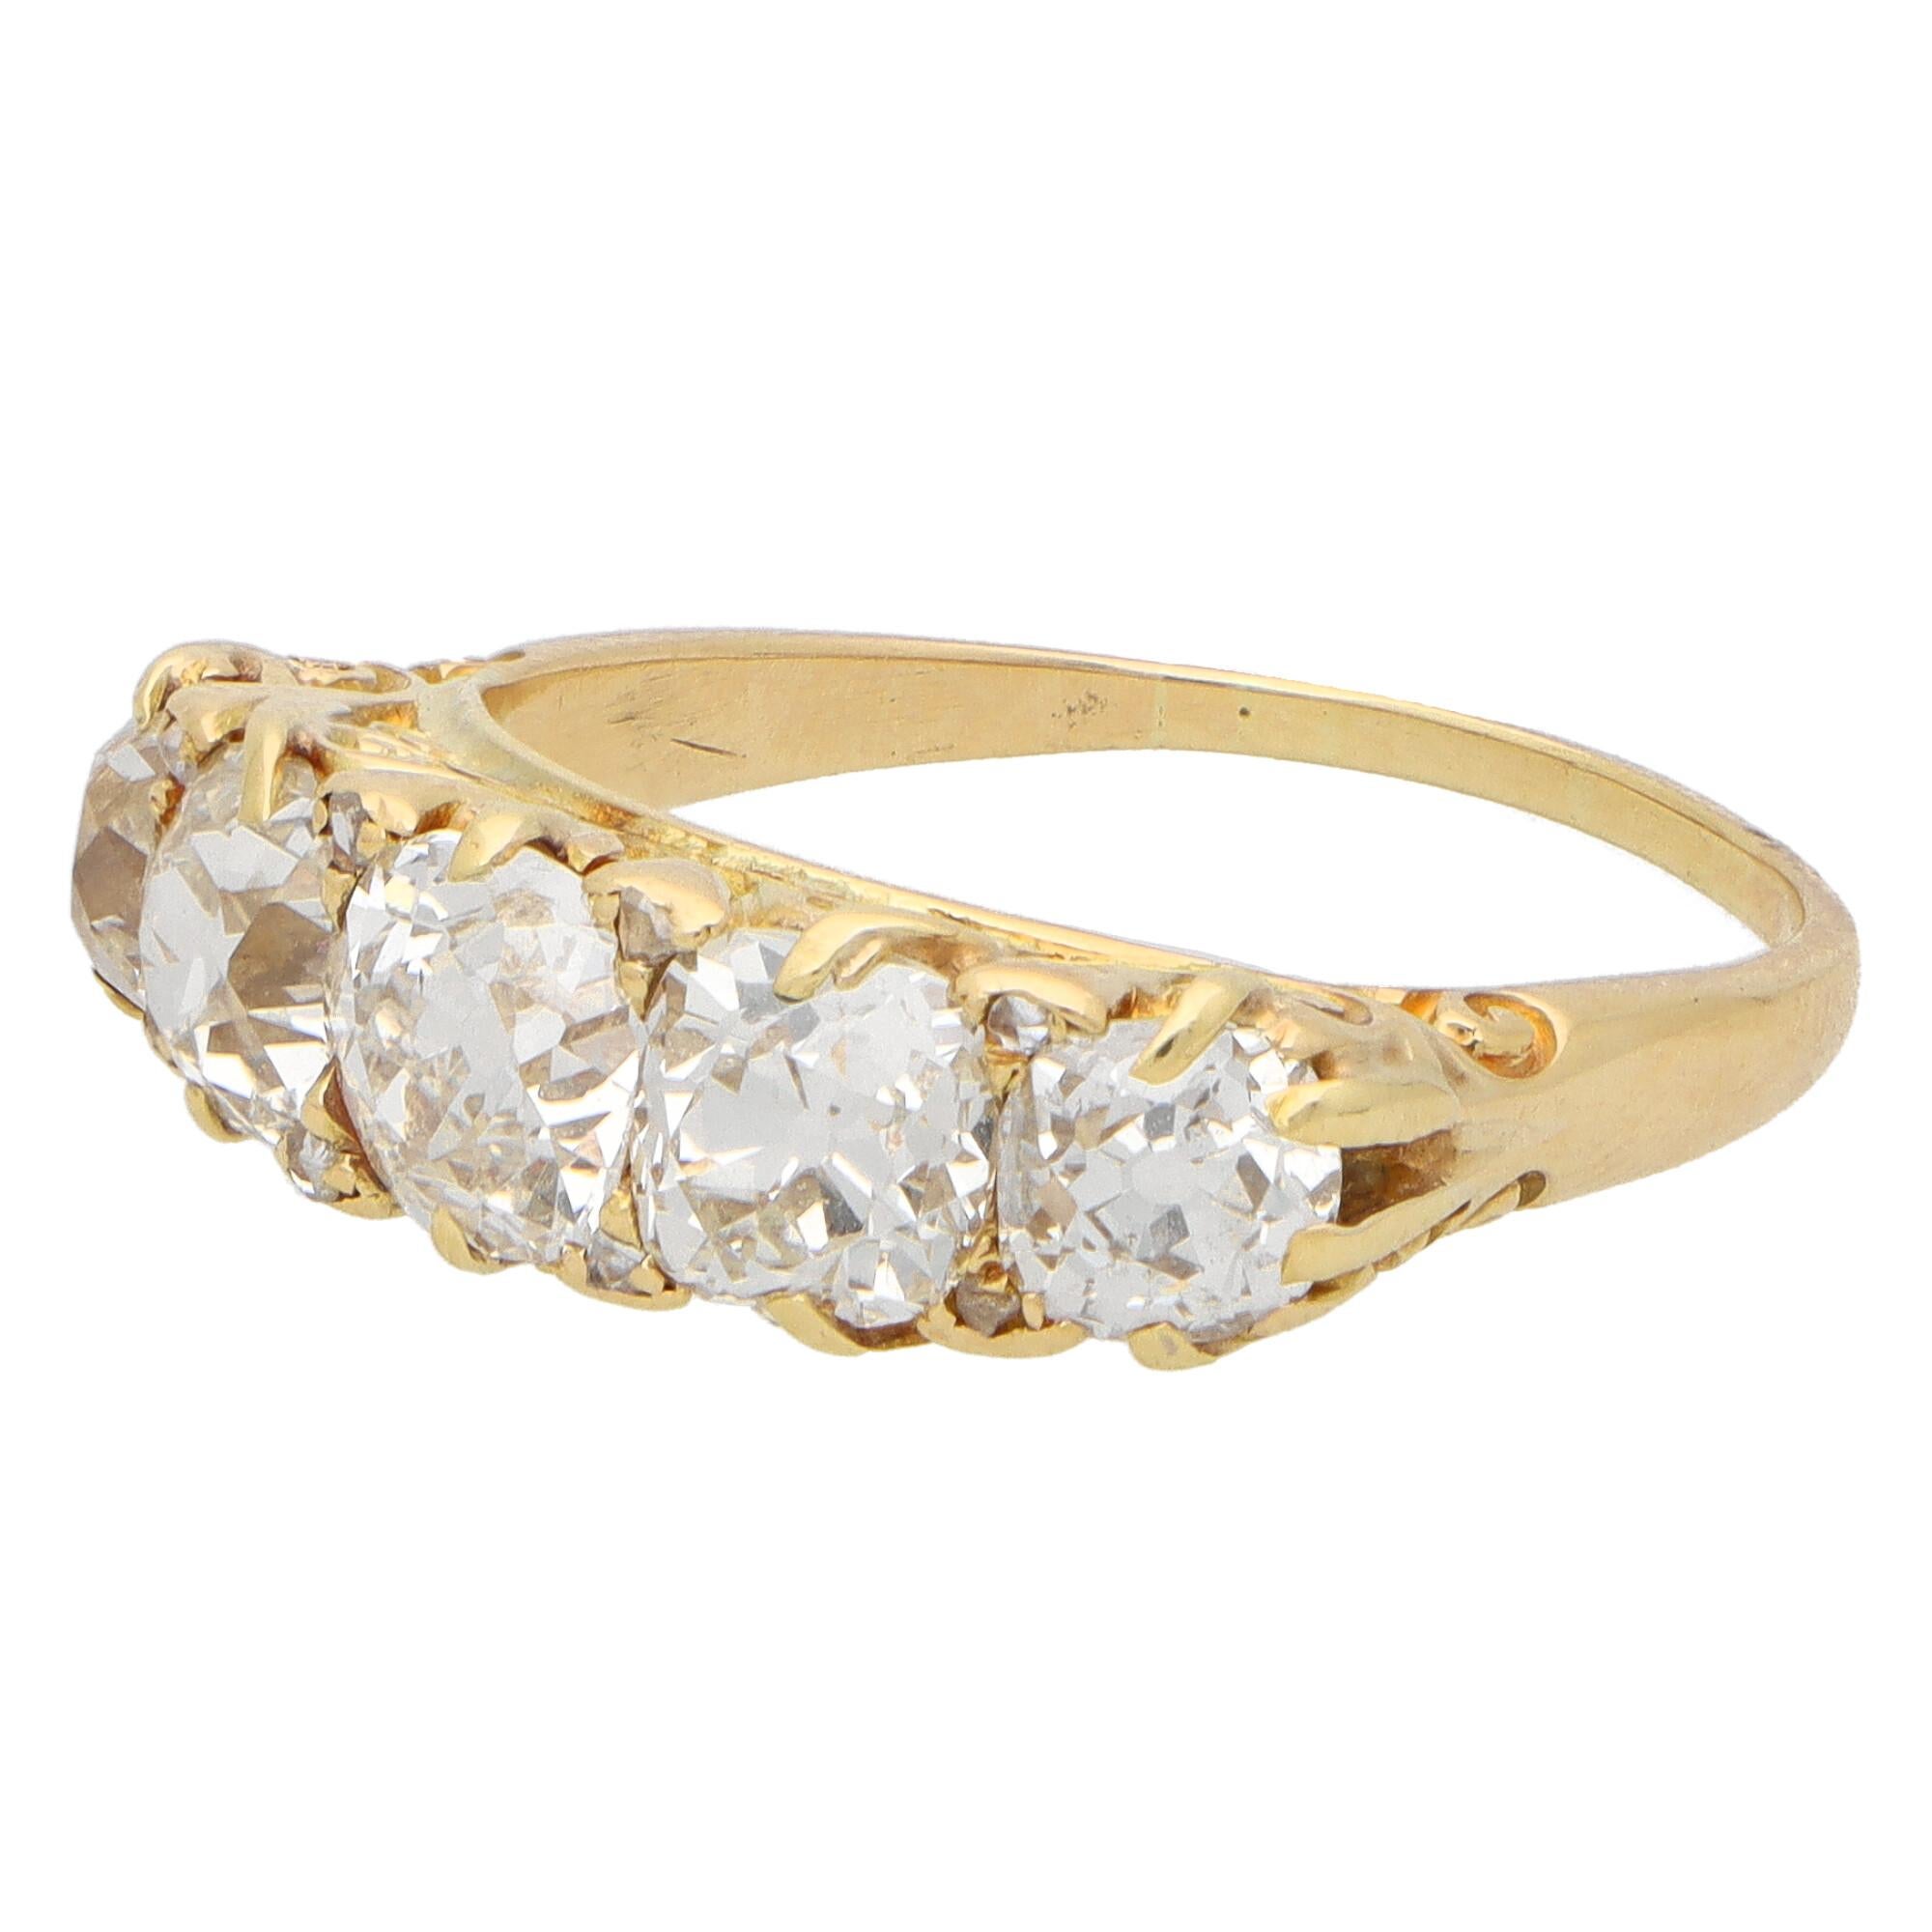 Late Victorian Old Mine Cut Diamond Five Stone Ring Set in 18k Yellow Gold 2